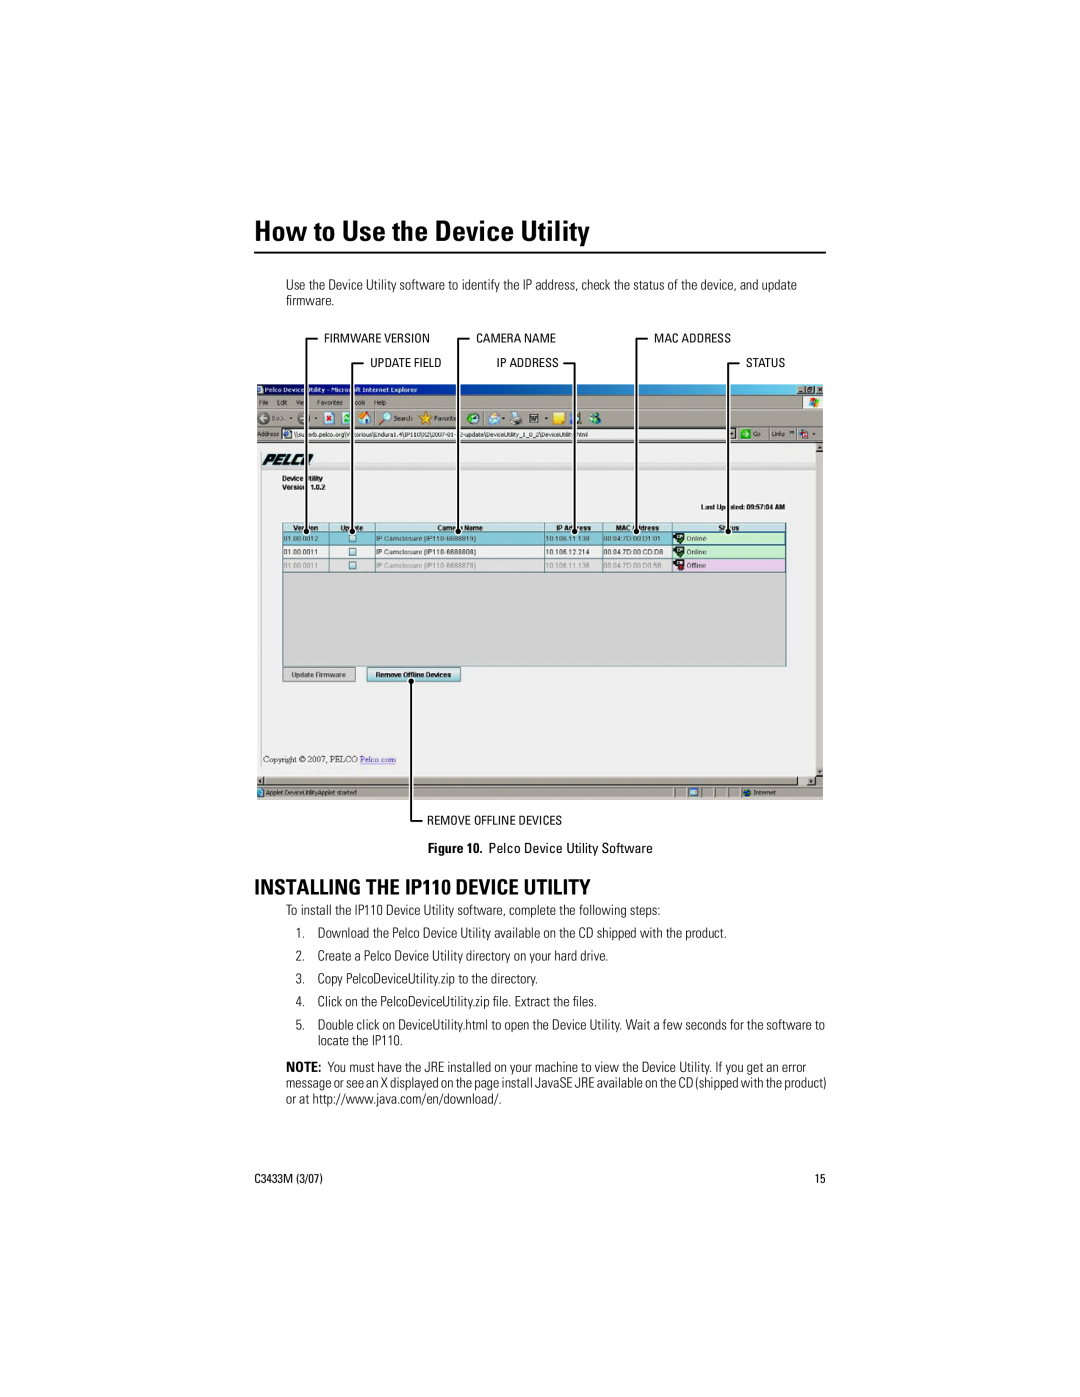 Pelco C3433M (3/07) manual How to Use the Device Utility, INSTALLING THE IP110 DEVICE UTILITY 